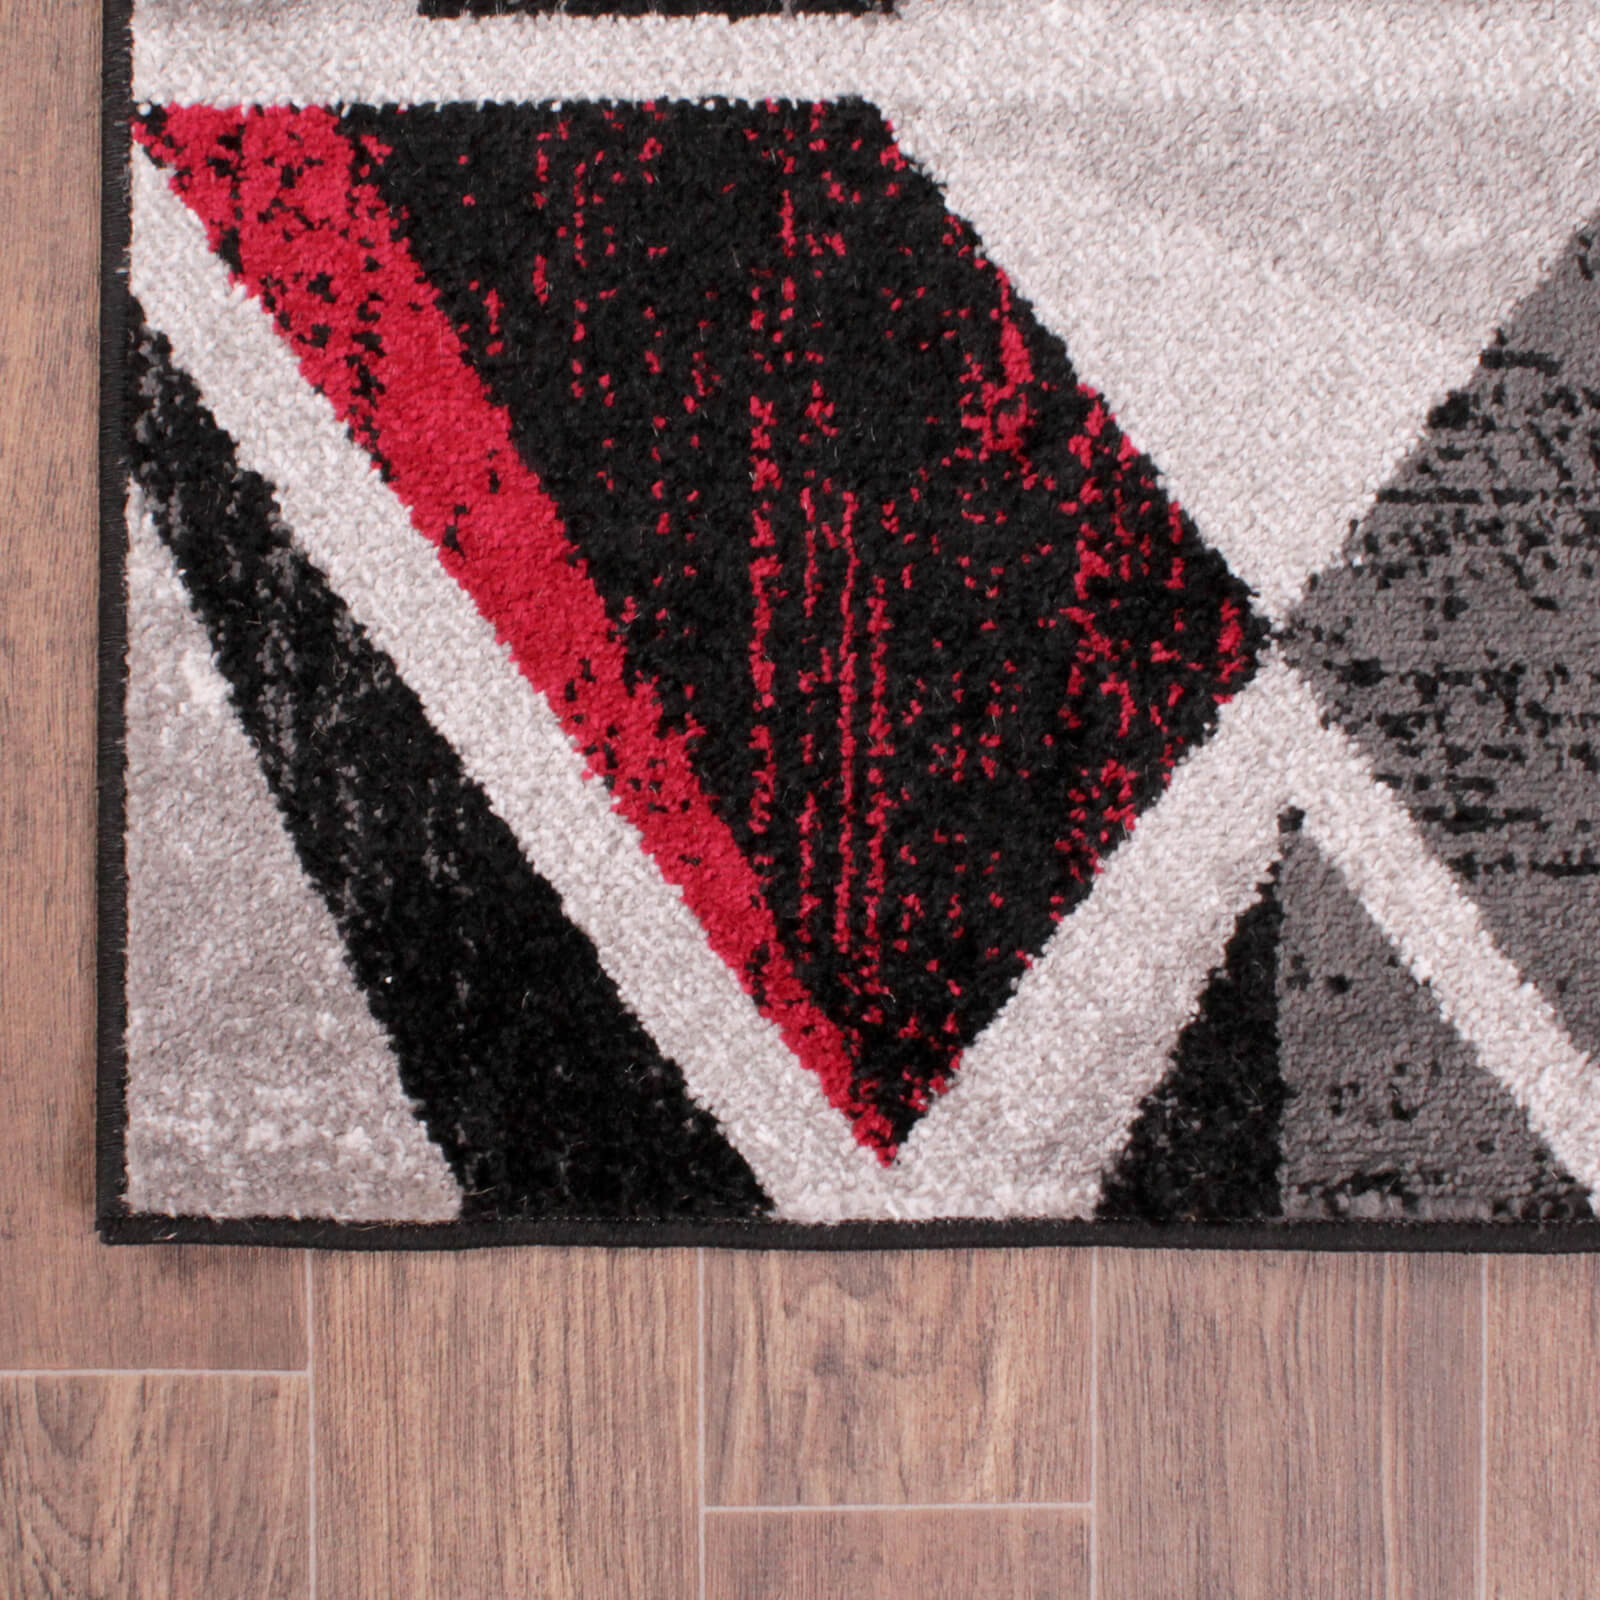 Ultimate Home Living Spirit Abstract Red Grey Rug